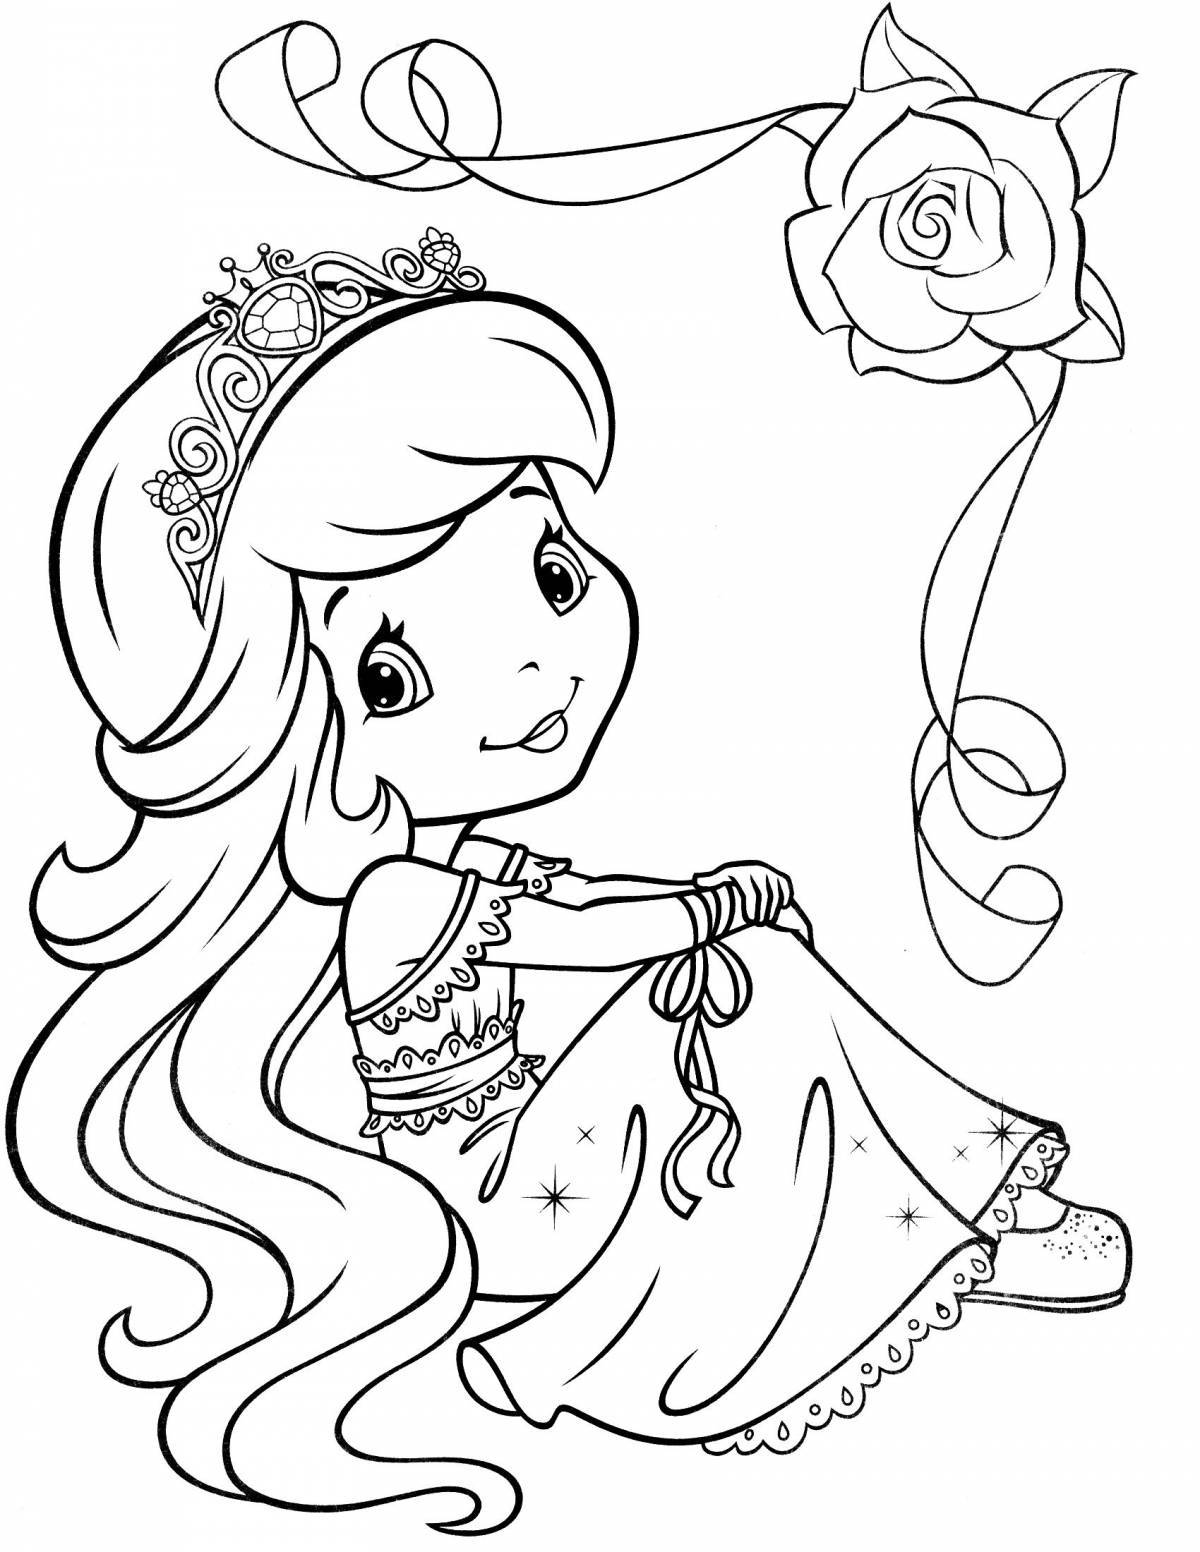 Witty girly coloring book